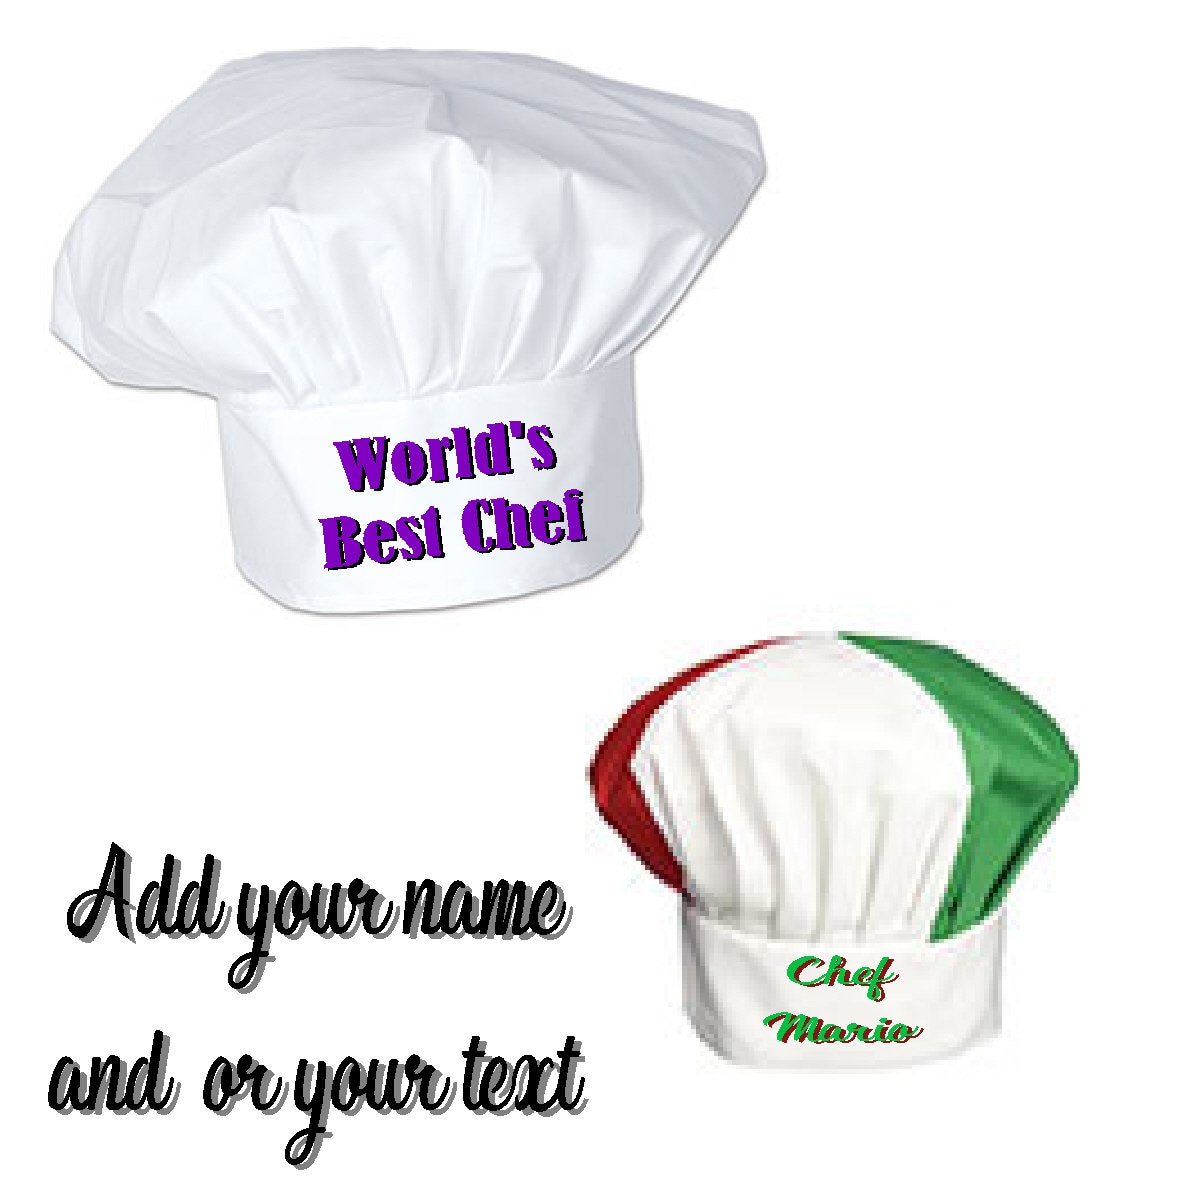 Personalized Cotton Chefs image